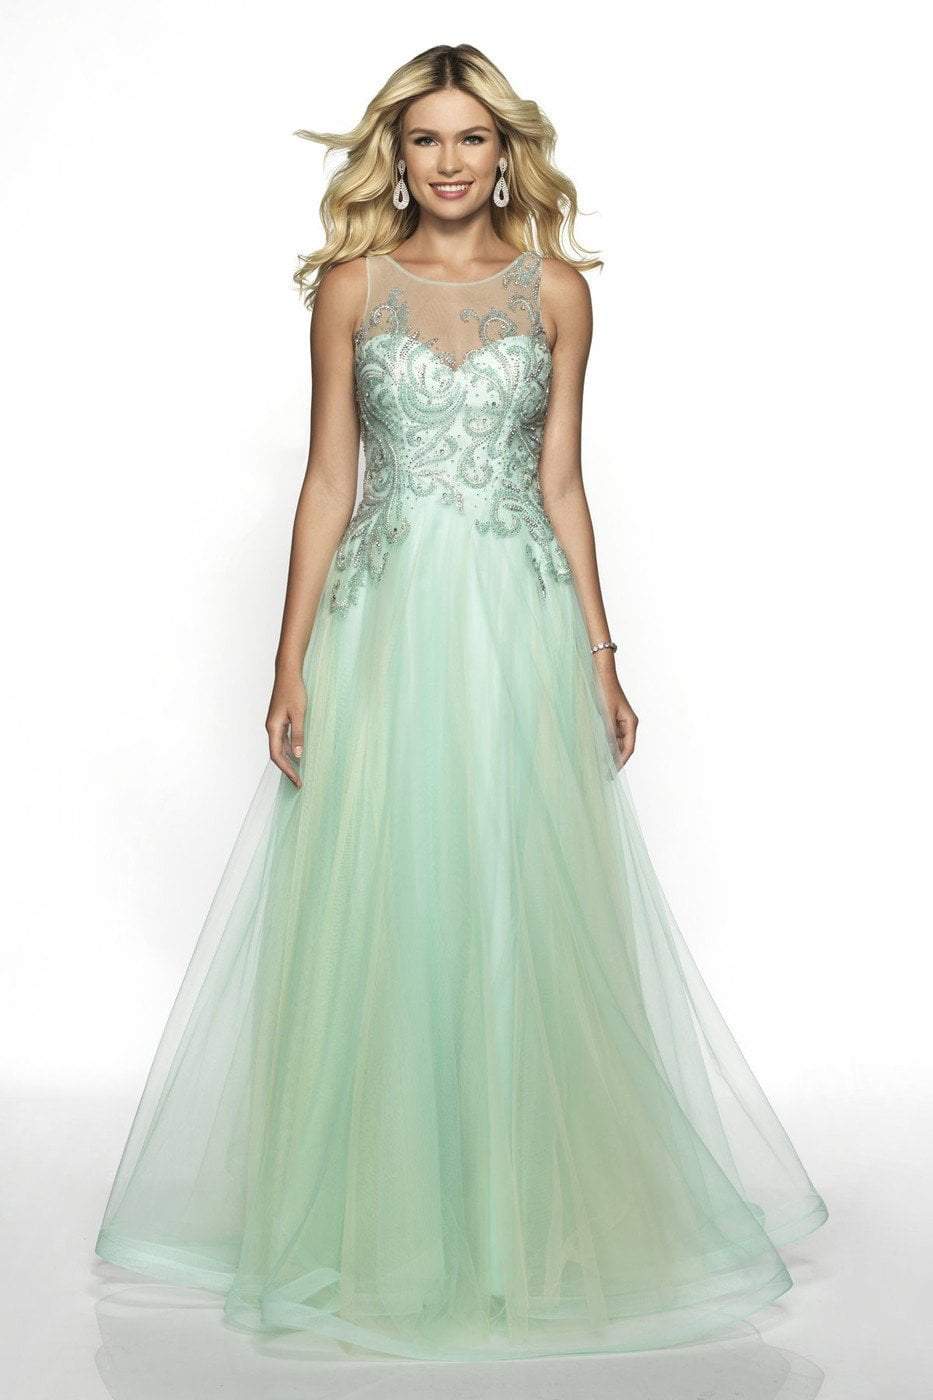 Blush by Alexia Designs - 11729 Beaded Illusion Jewel A-line Dress In Green